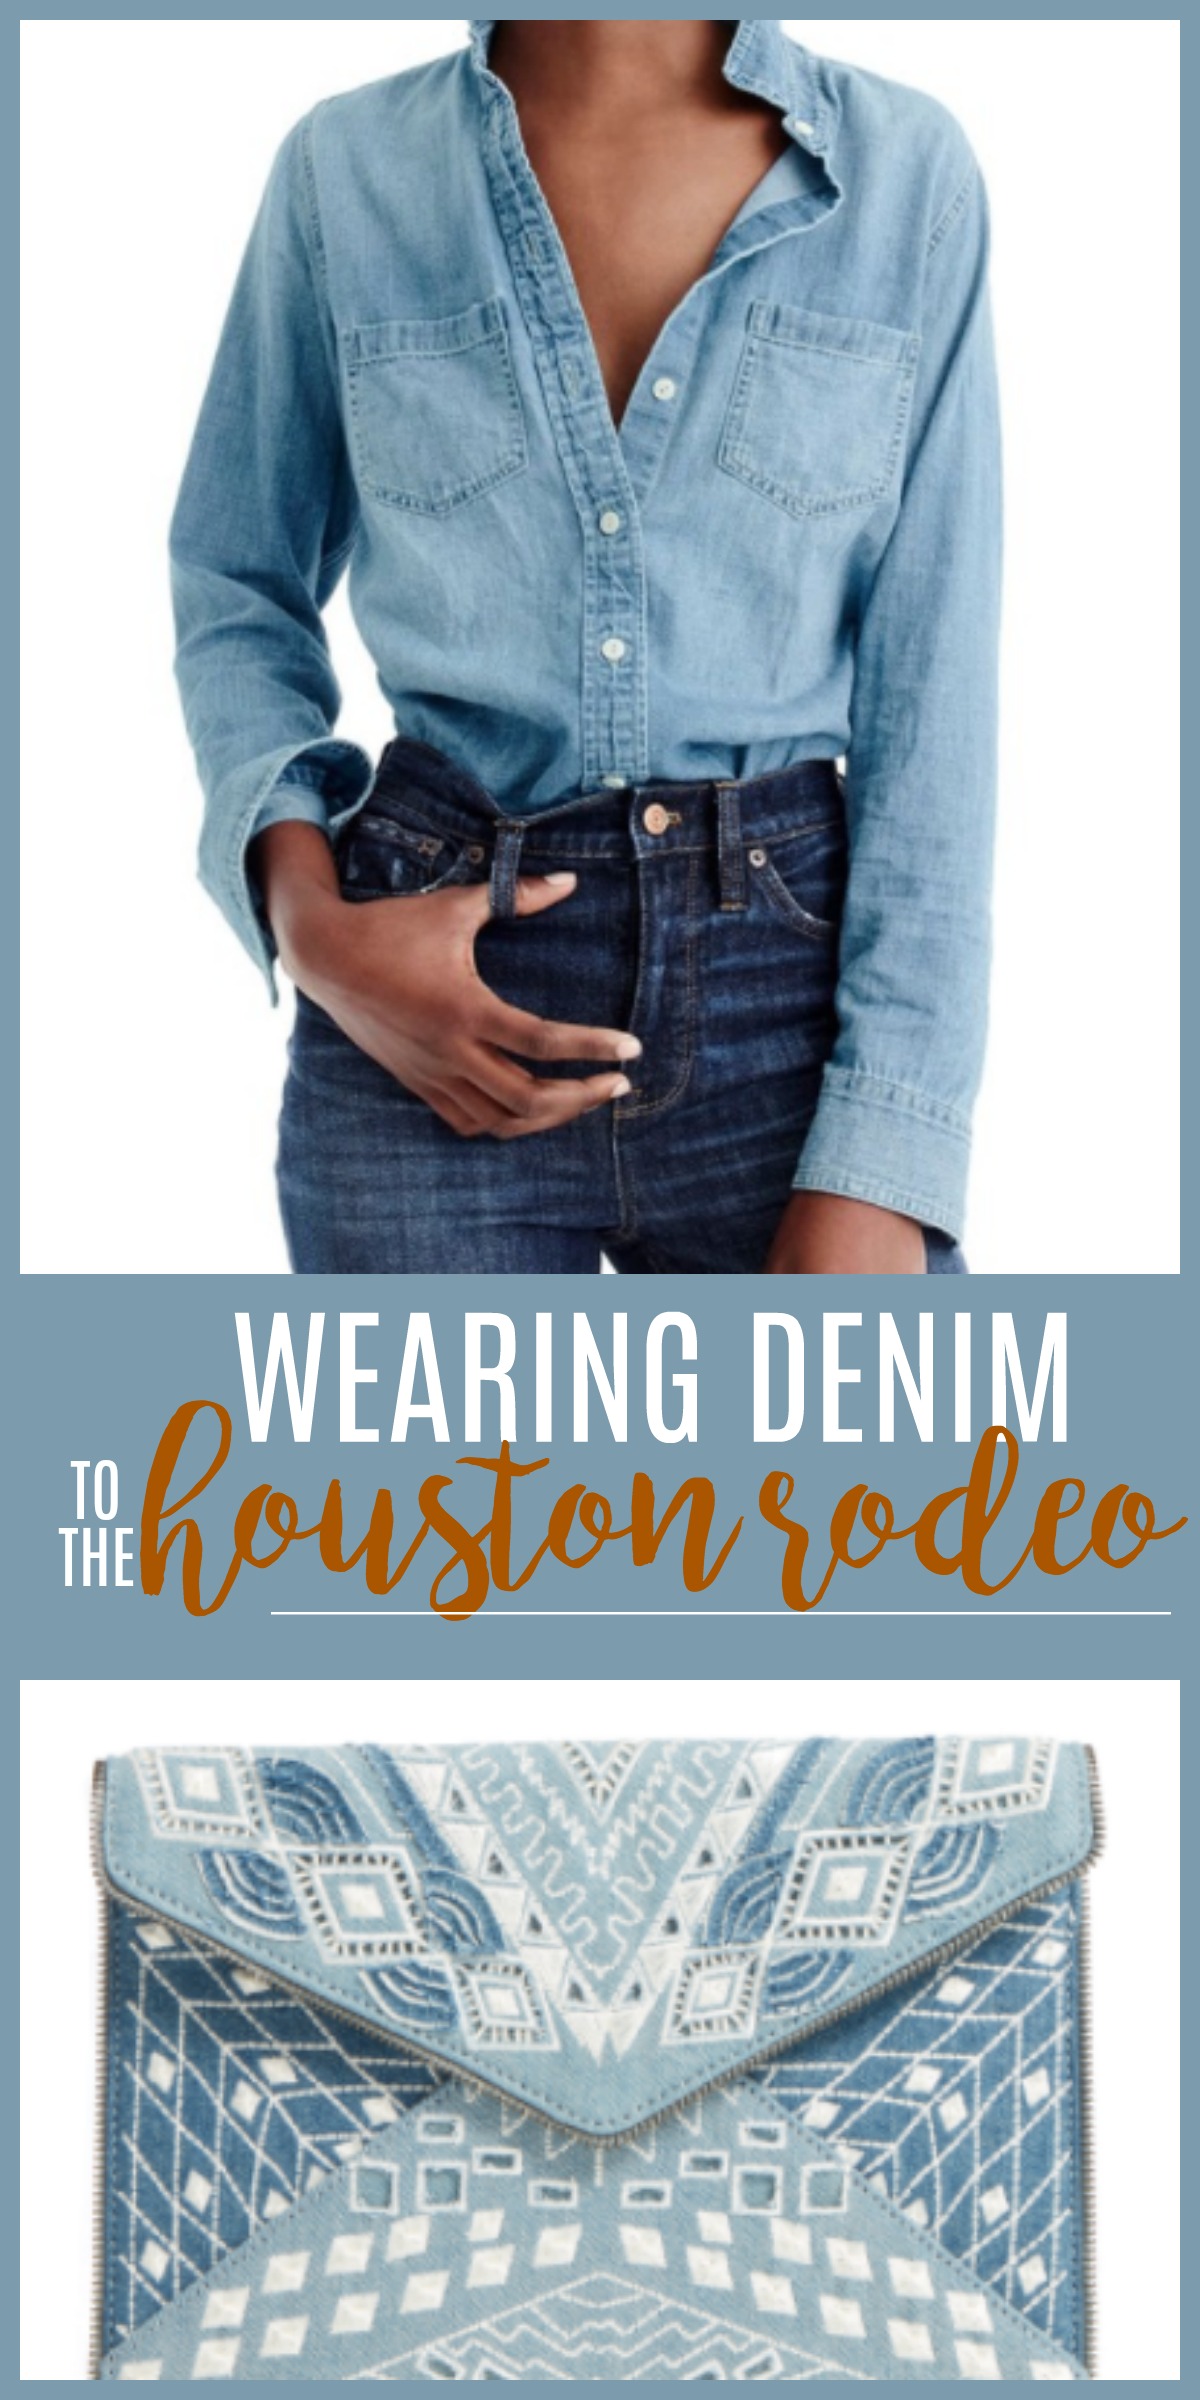 rodeo, denim wear, denim outfits, what to wear to the rodeo, rodeo outfit inspiration, summer denim outfits, spring denim outfits